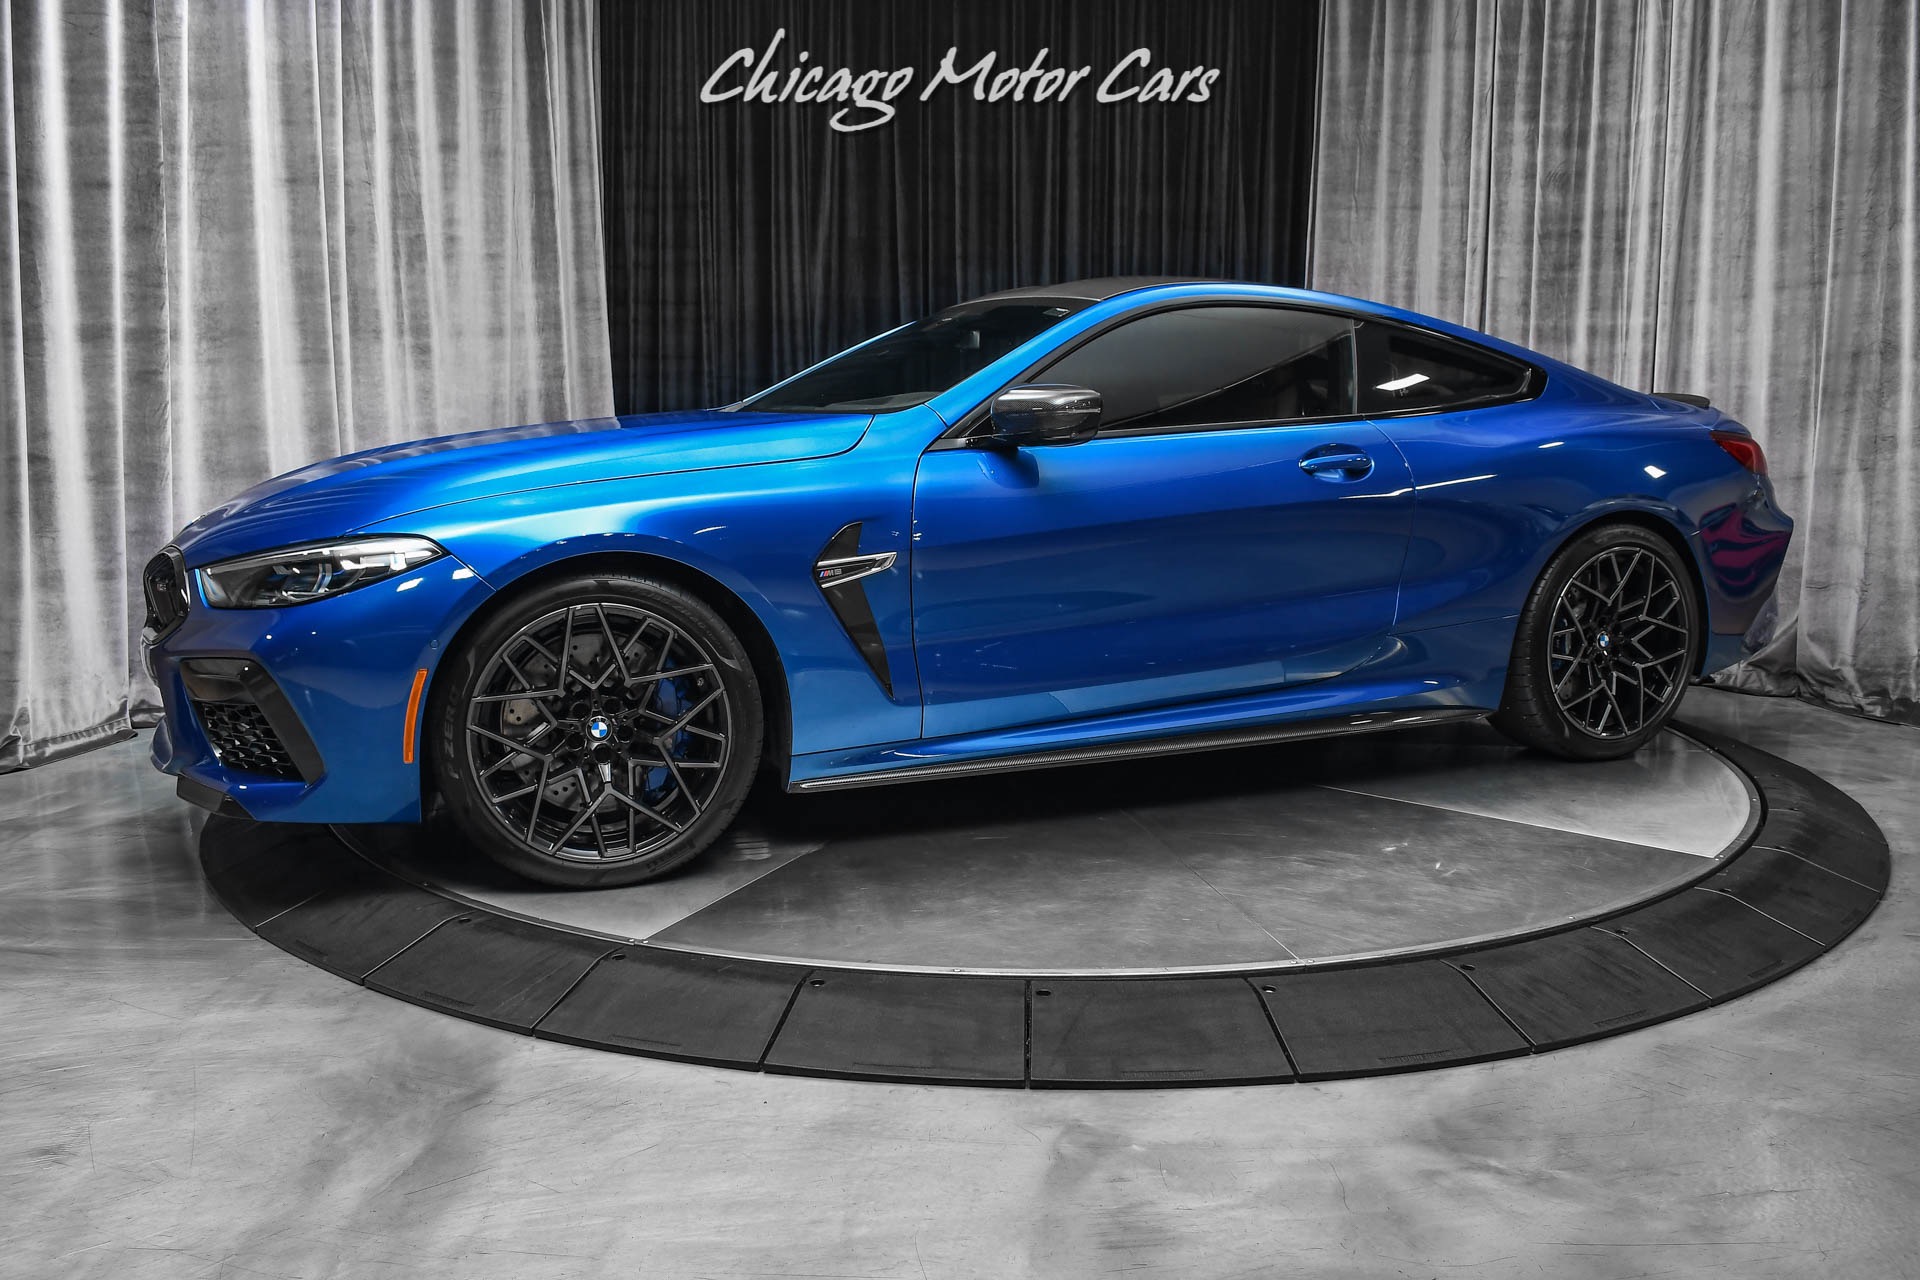 Used Bmw M8 Competition Coupe Msrp 164k 15k In Factory Carbon Upgrades For Sale Special Pricing Chicago Motor Cars Stock